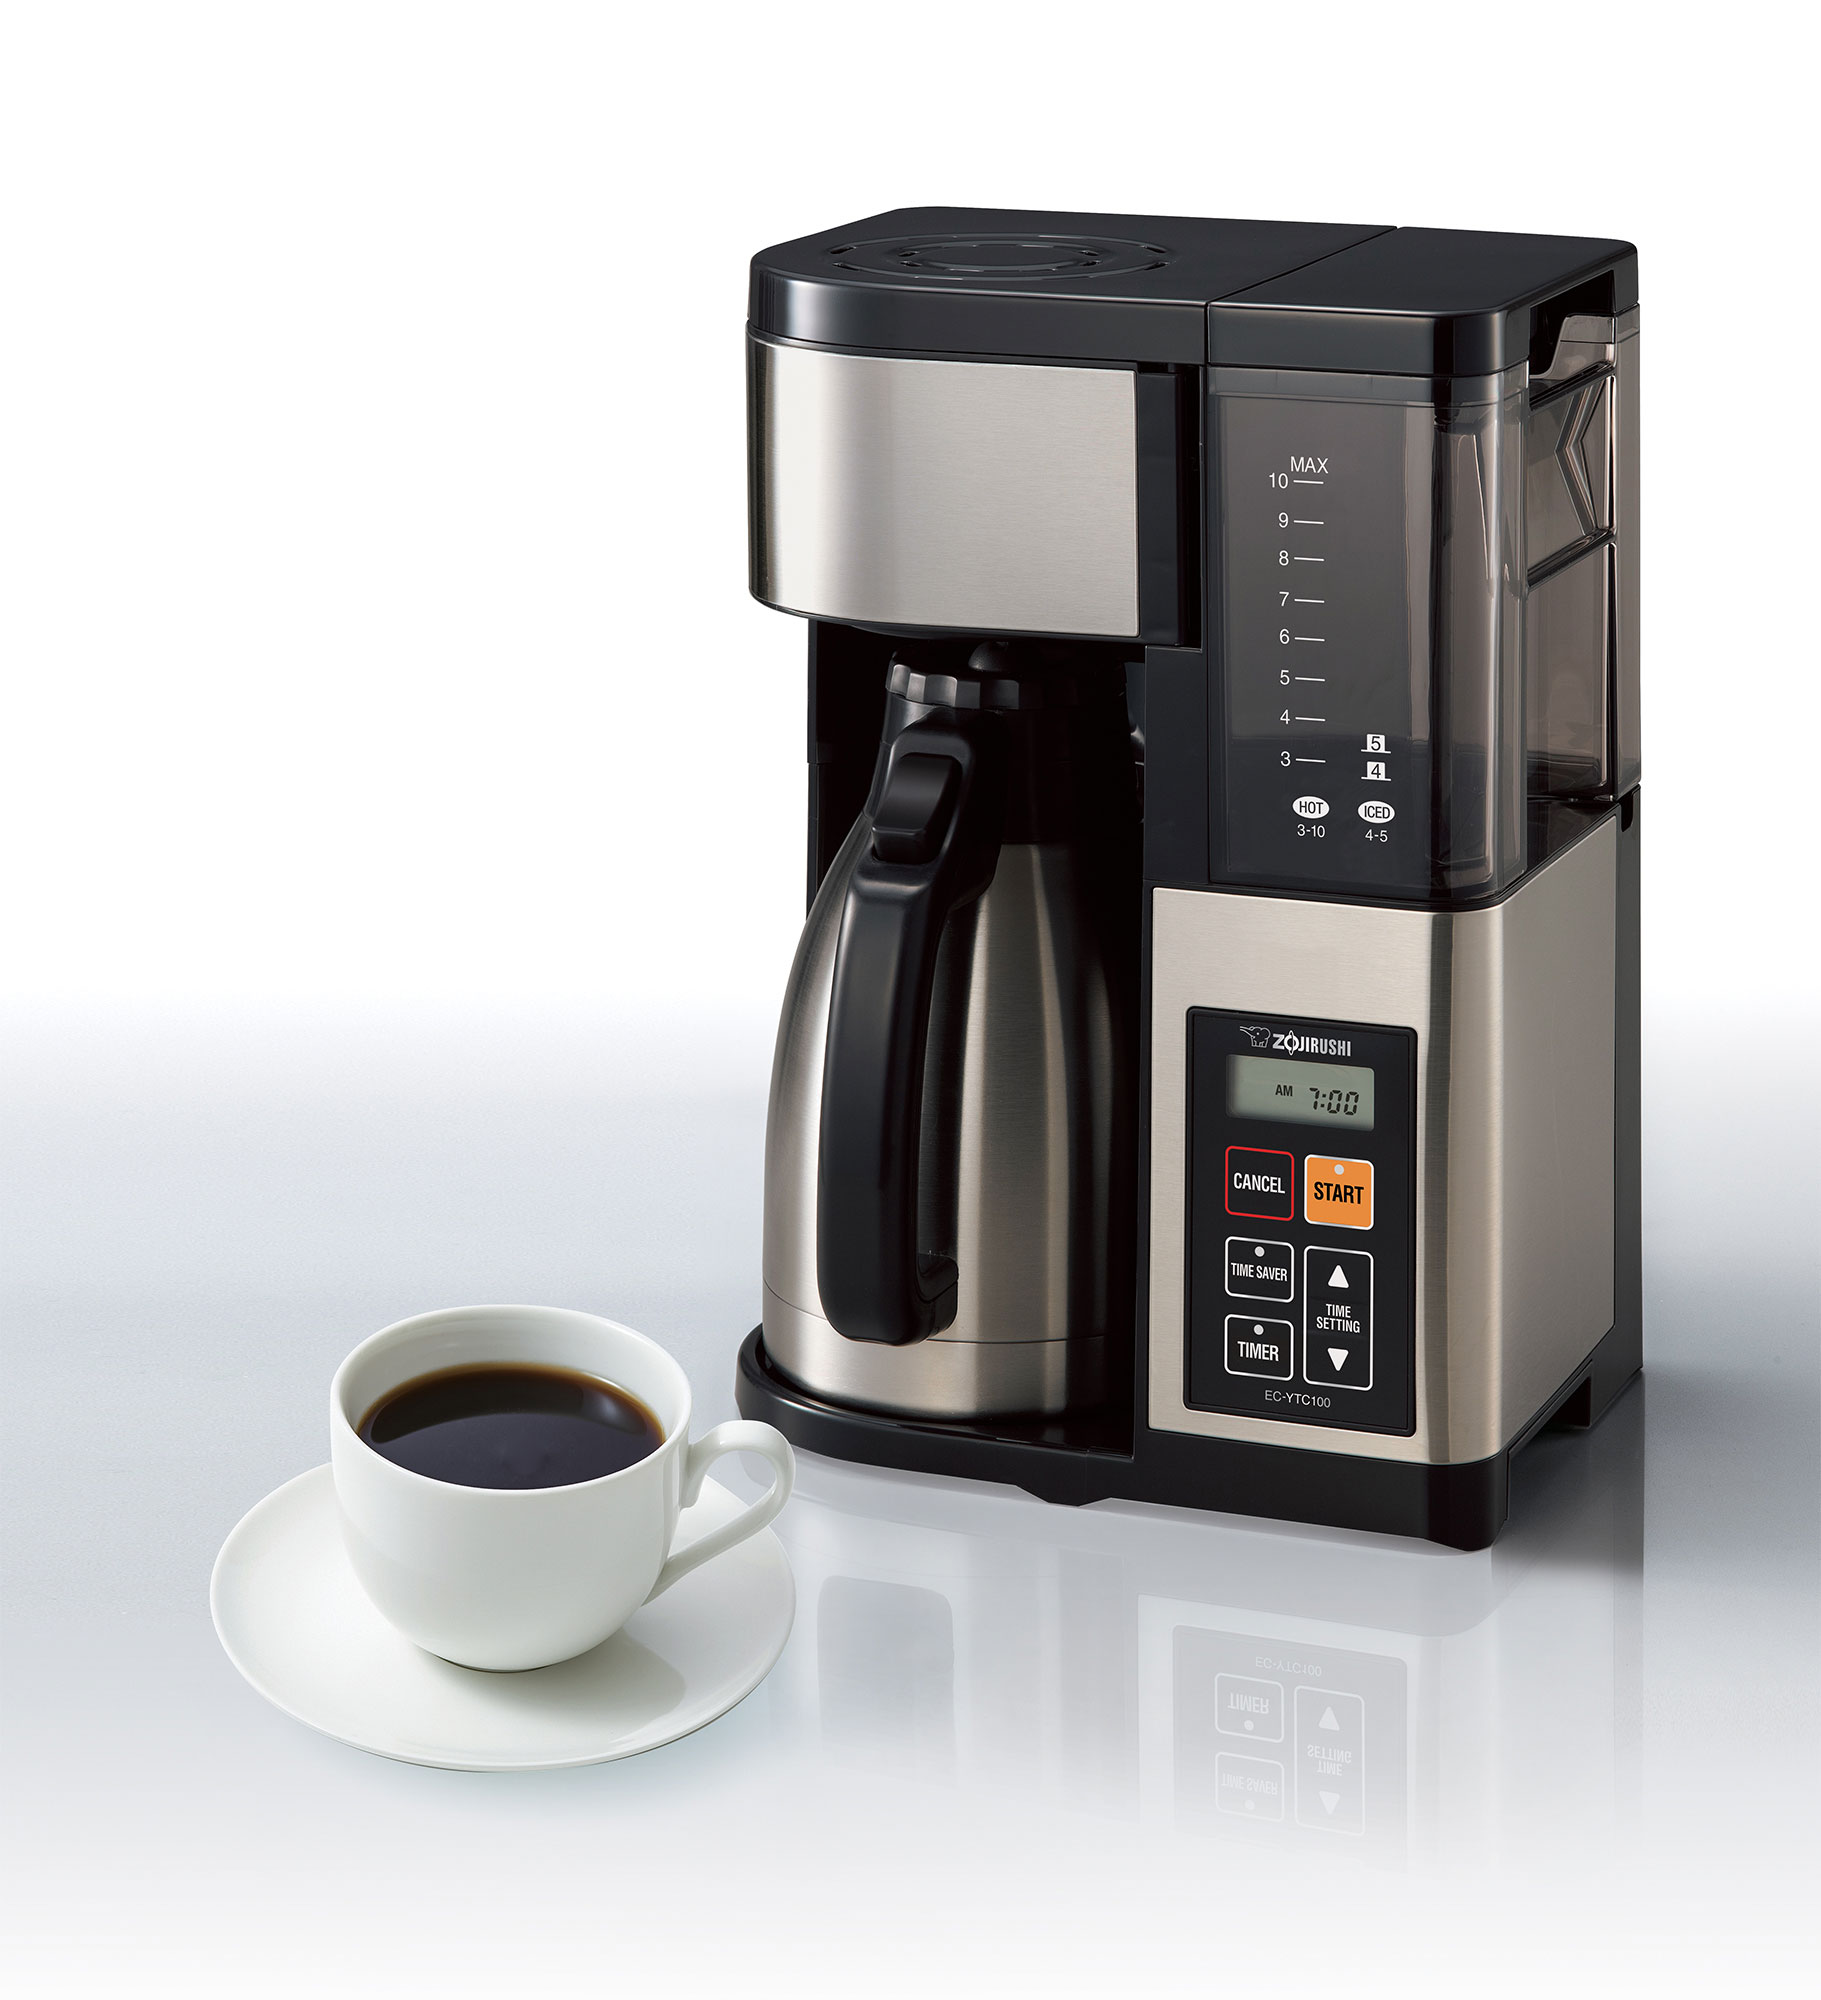 The Best 4 Cup Coffee Maker <-- 6 Best 5 Cup Coffee Maker Reviews